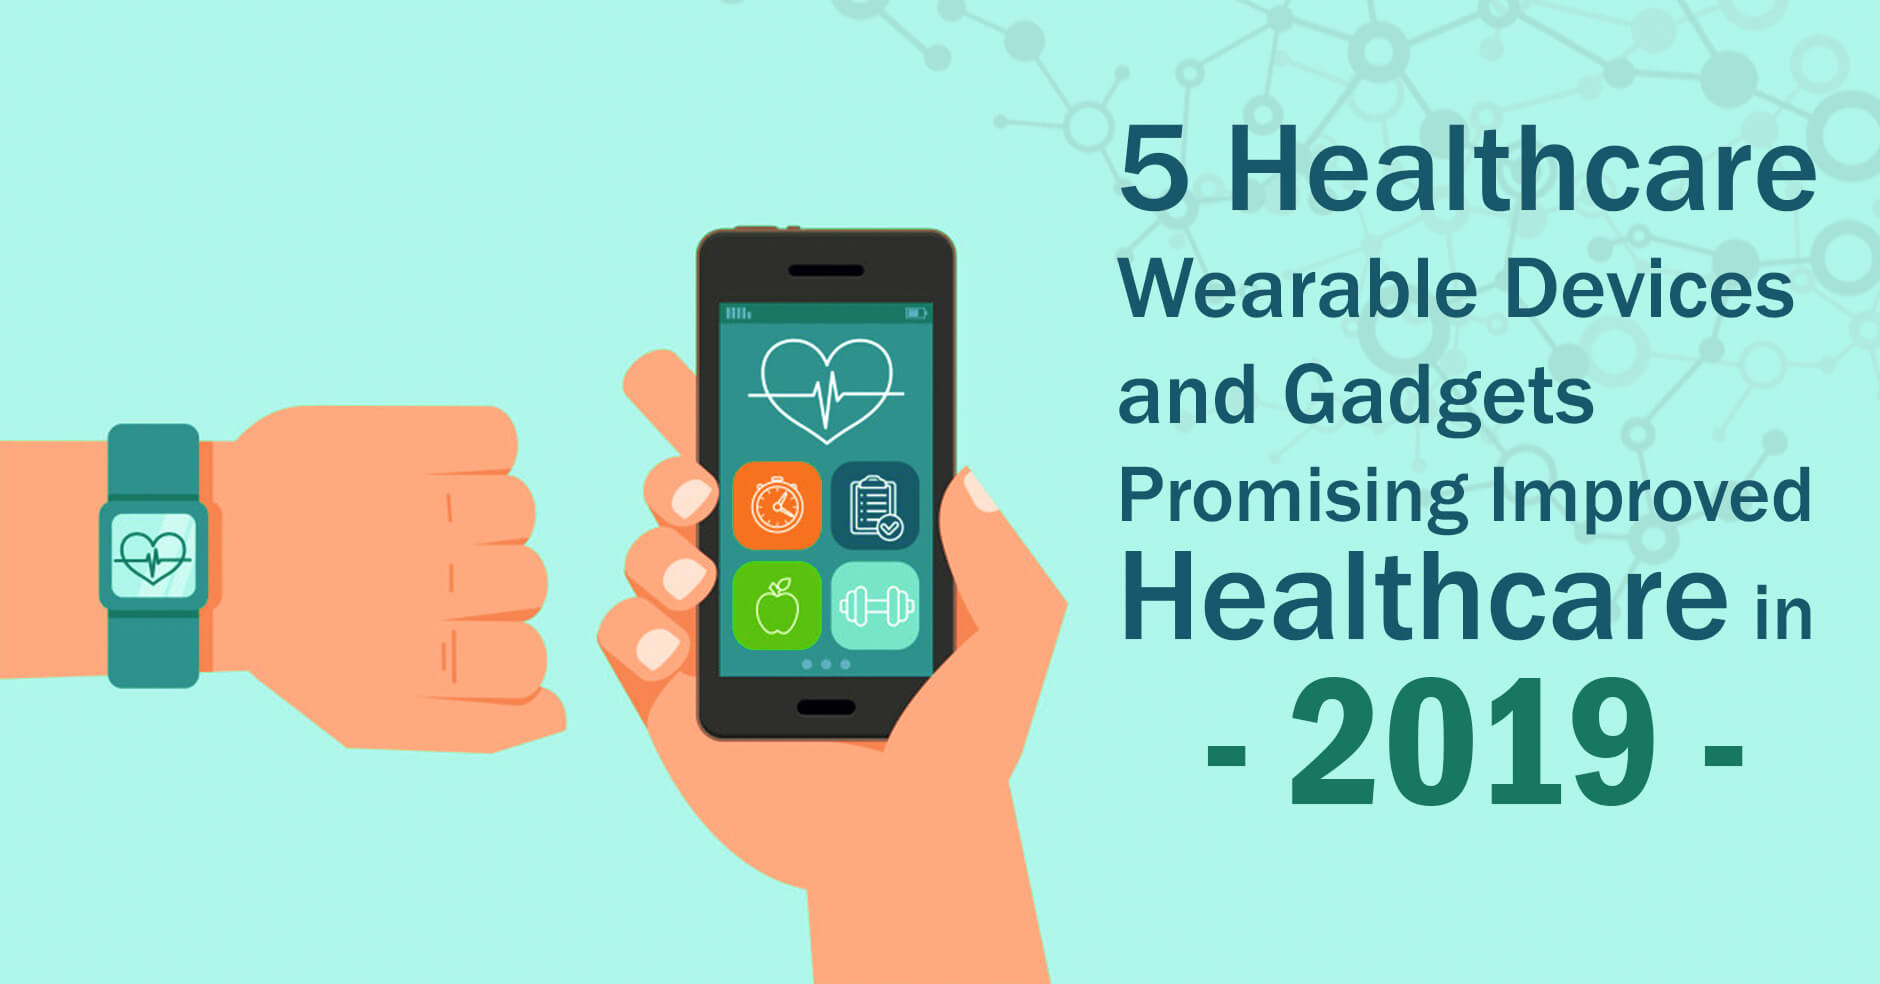 5 Healthcare Wearable Devices and Gadgets Promising Improved Healthcare in 2019